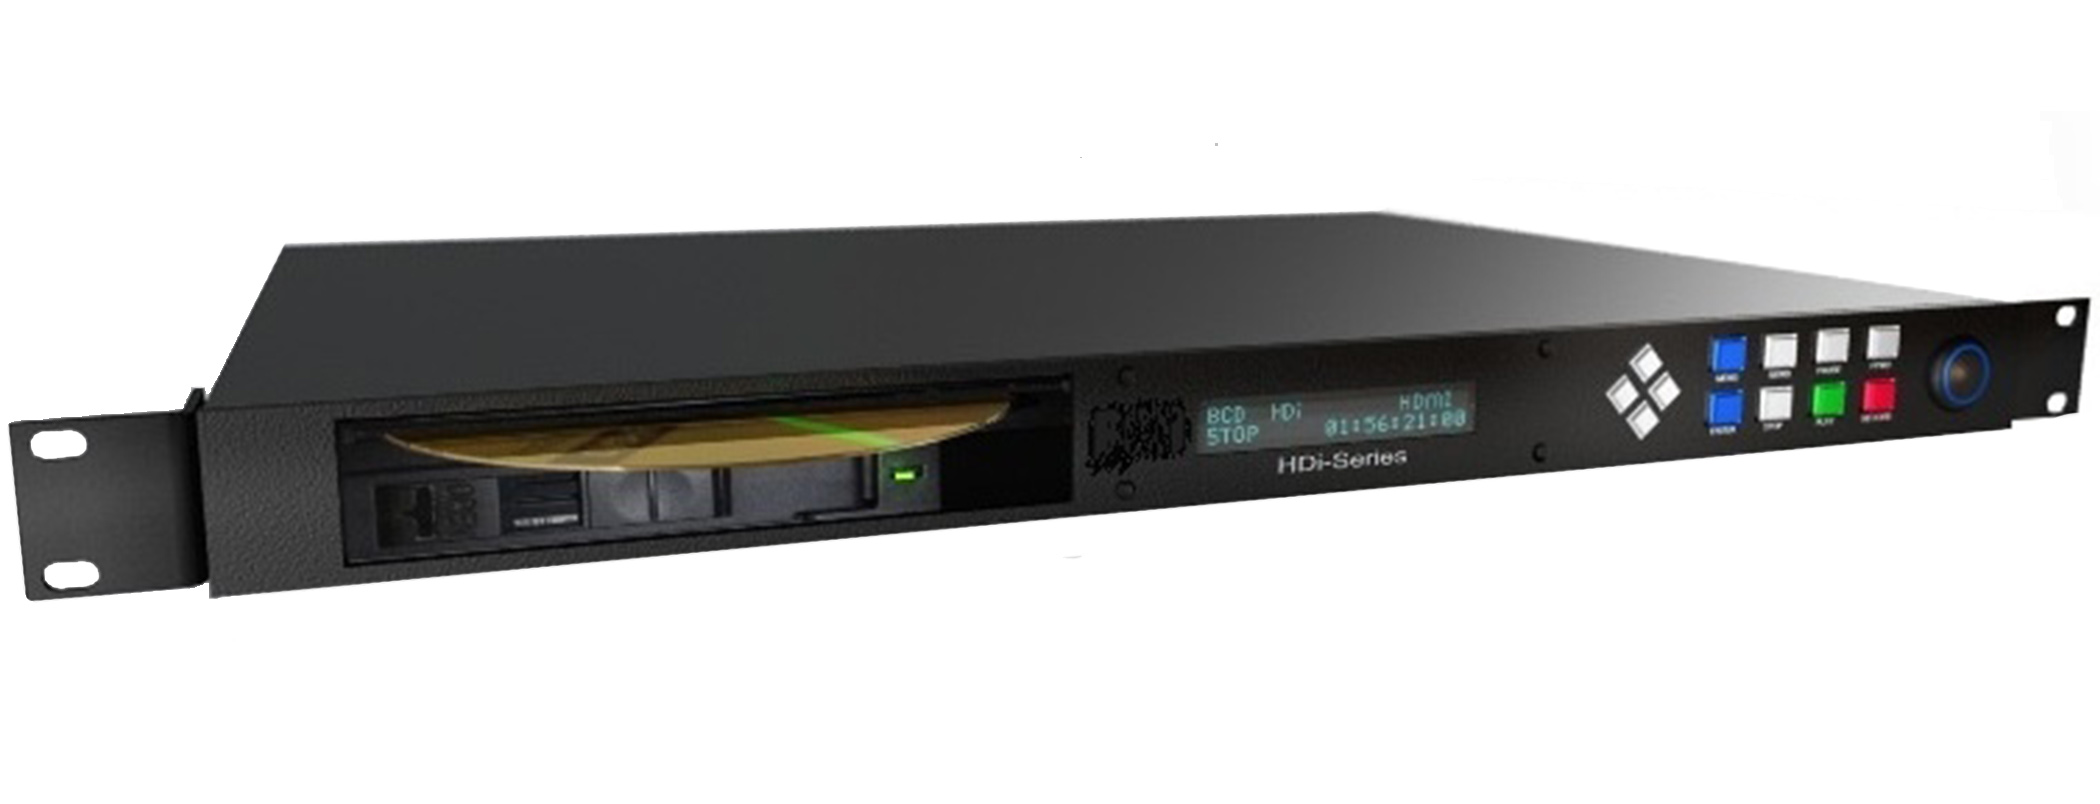 Orientalsk timeren Mauve Niagara Video HDi-250-MIL-Std DVD-RW Drive With HDMI, Component And  Composite Inputs, No HDD | Full Compass Systems